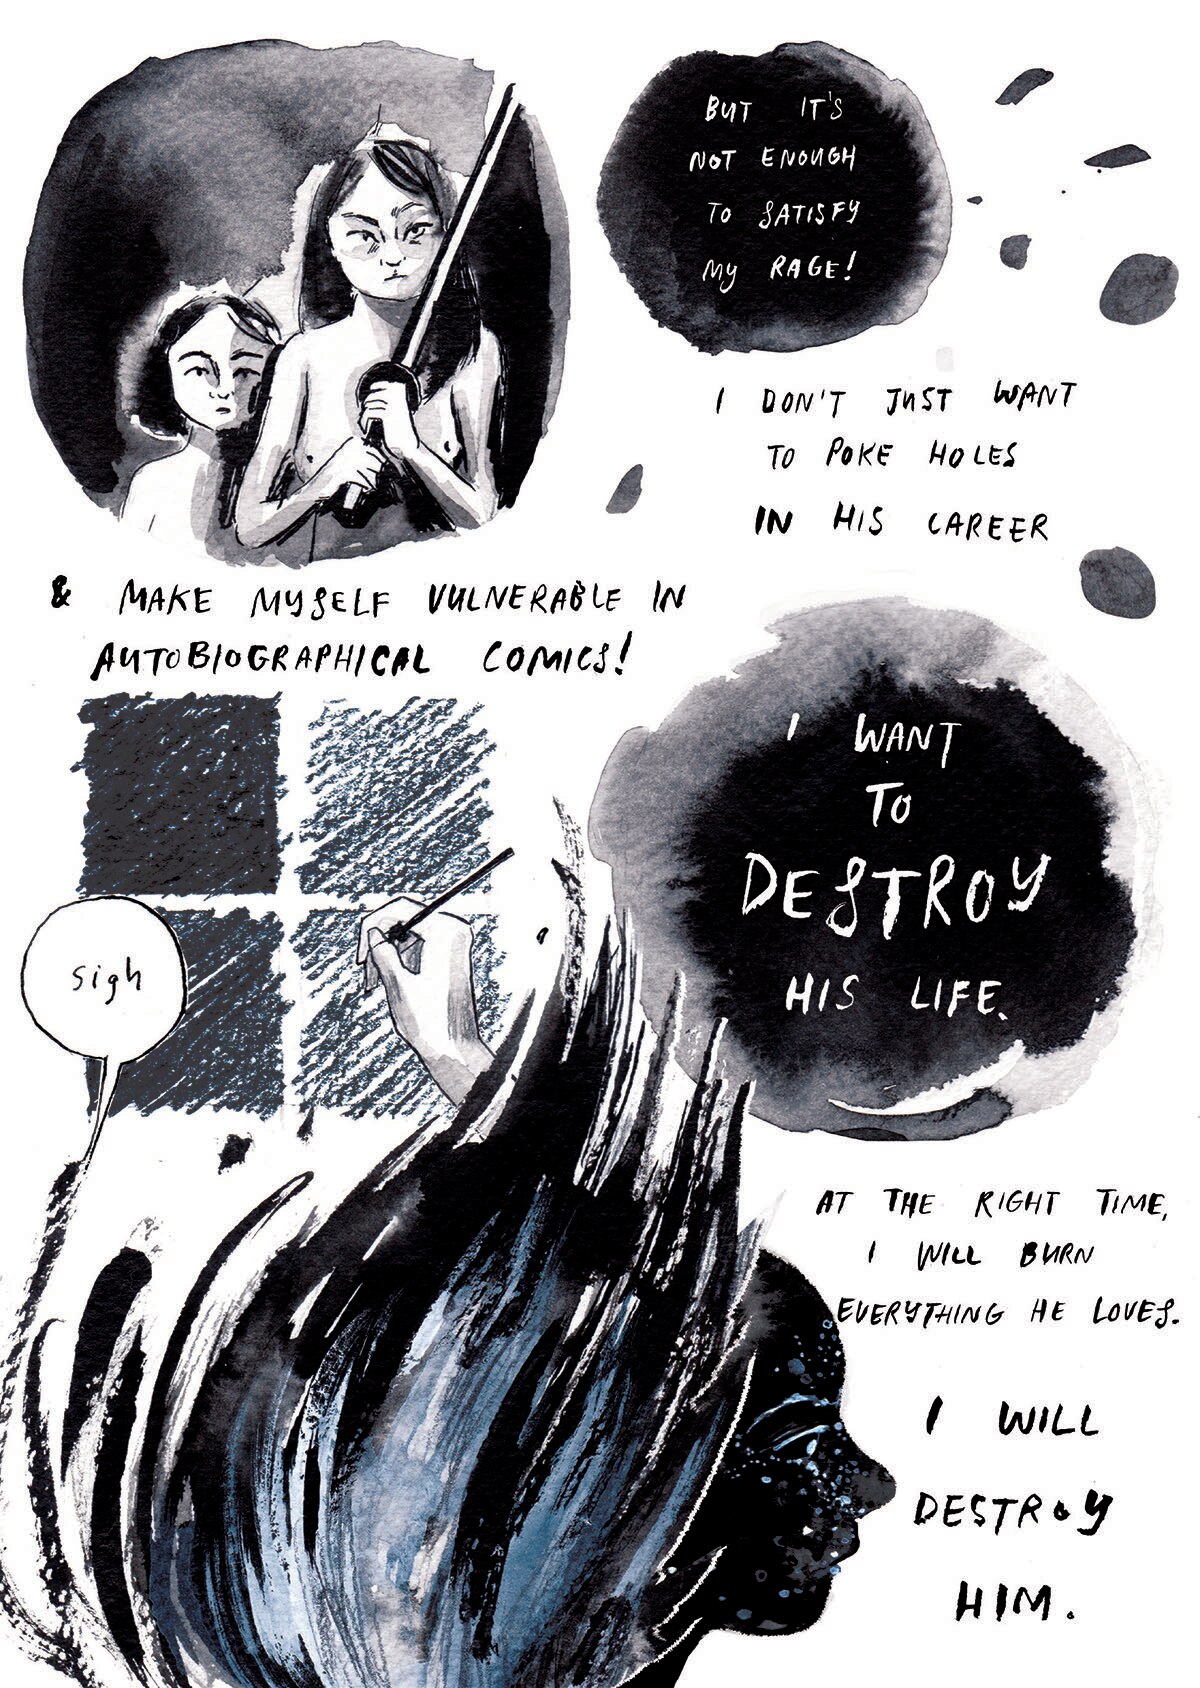 Excerpt from Destroy Everything You Touch comic by Rachel Ang and features water colour illustrations and figures on white paper